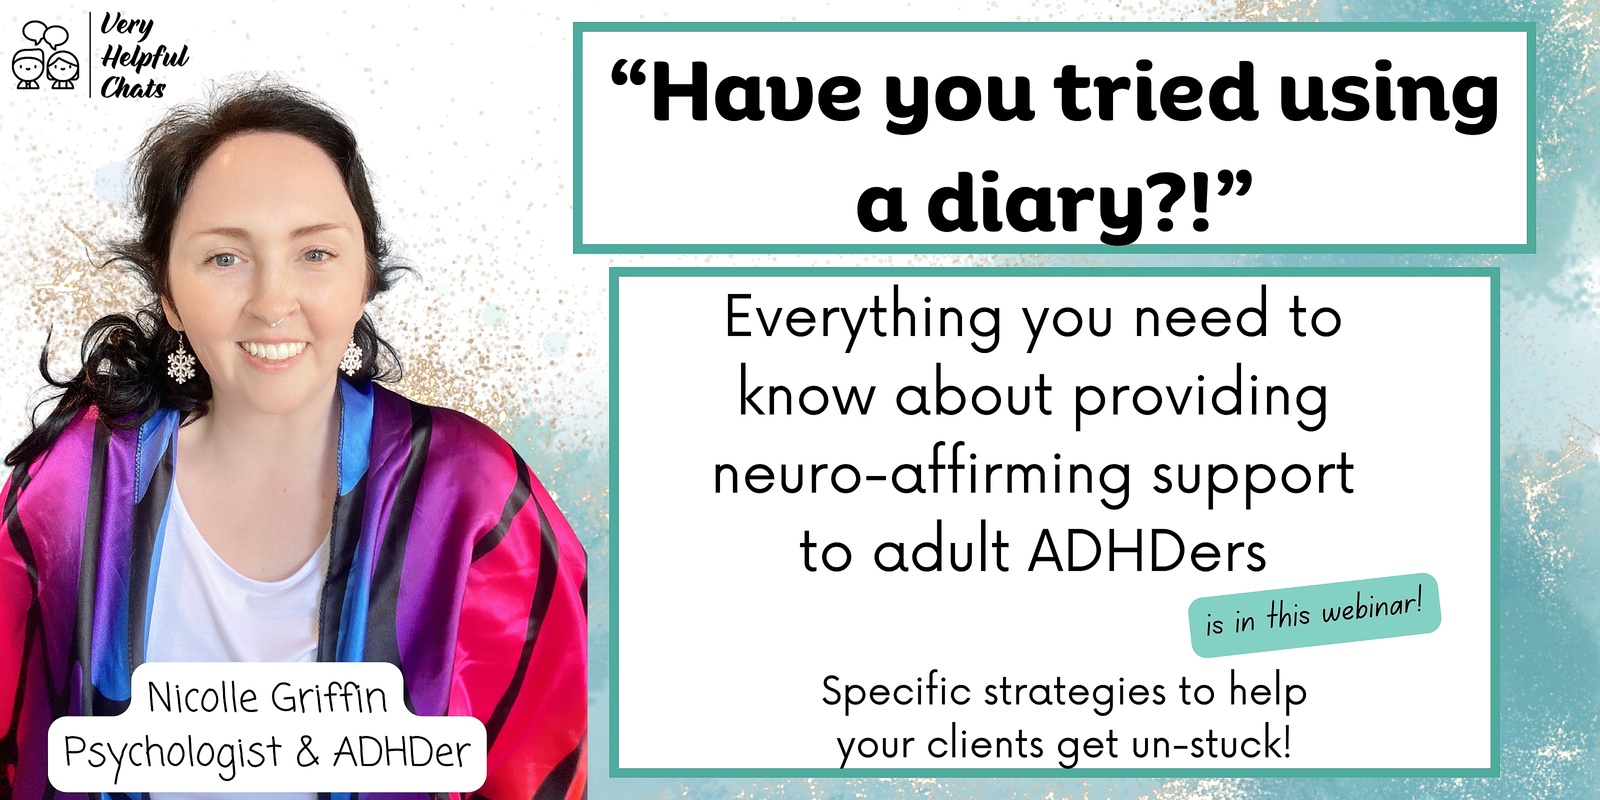 Banner image for “Have you tried using a diary?”  Providing neuro-affirming support for adult ADHD’ers.  Specific strategies to help your clients: How to get un-stuck